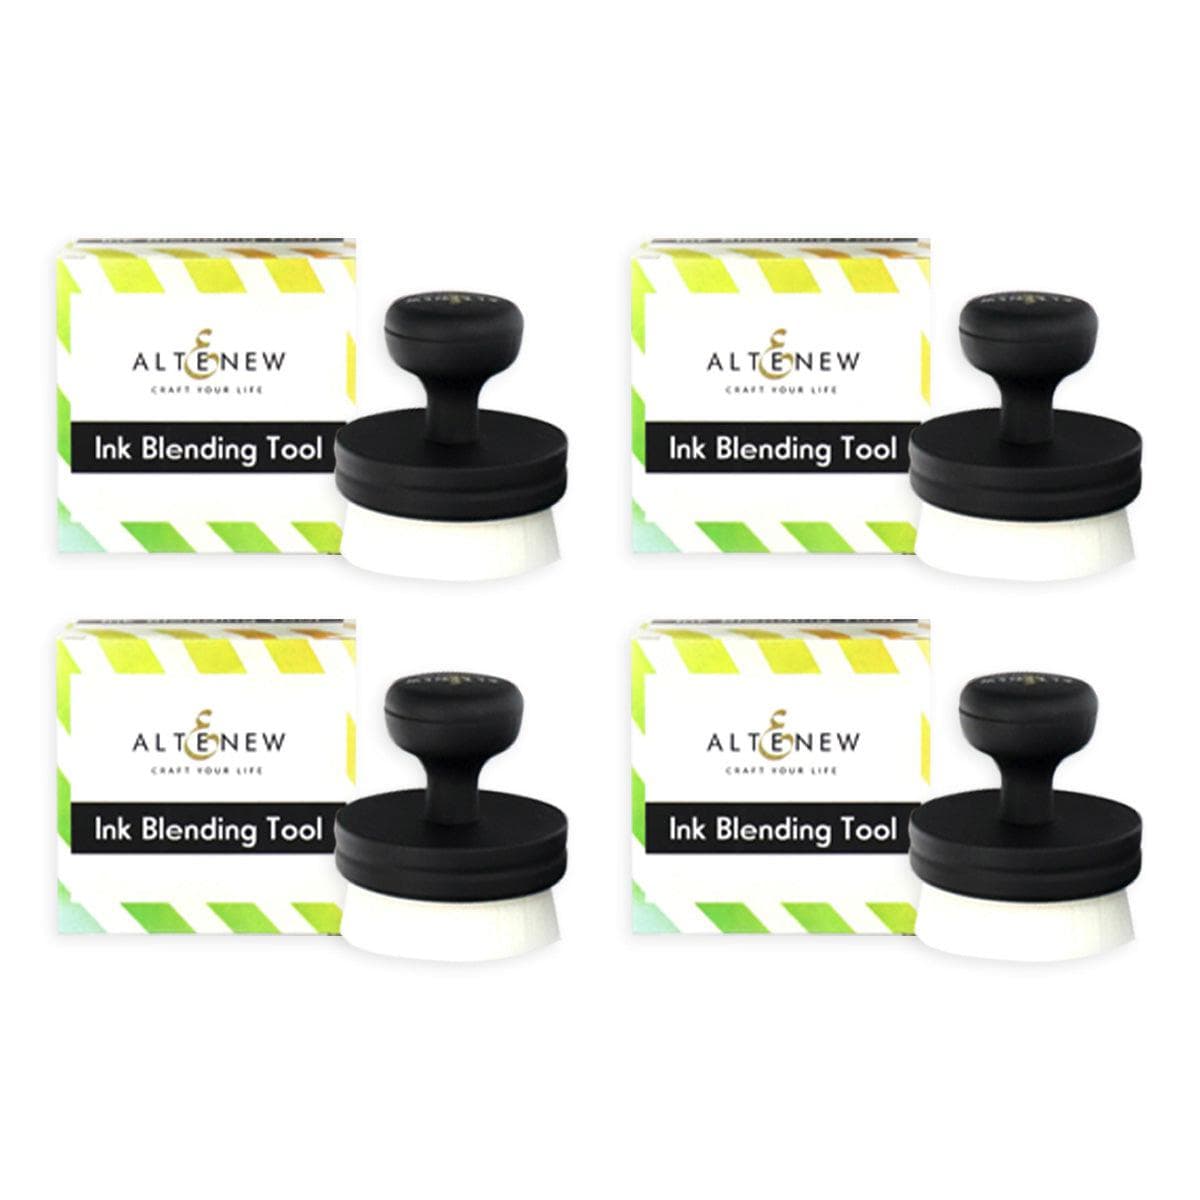 Altenew 16 Small Ink Blending Tool Bundle (4 Sets of 4 Tools)